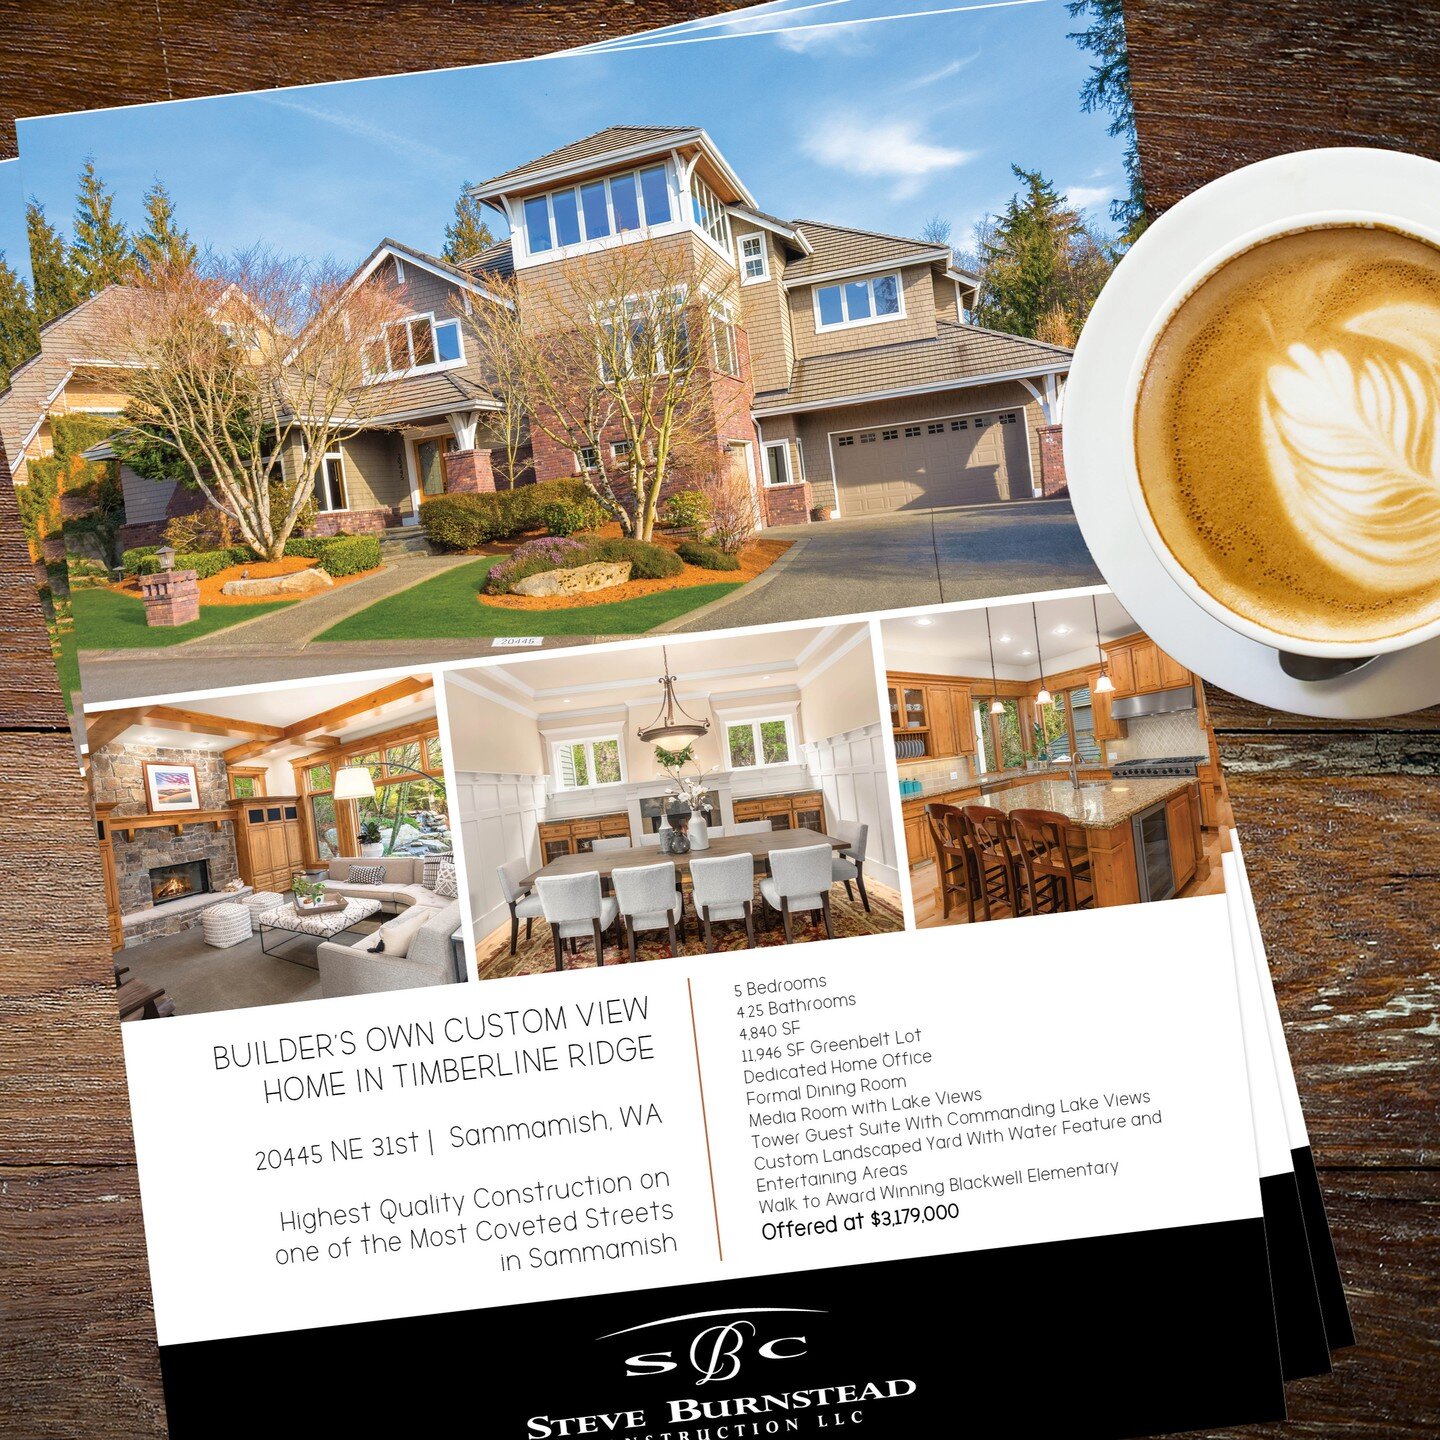 I love my job. Today I get to play with this incredible home in Sammamish - it has ALL the bells and whistles! And omg, the fireplaces...I can't.

#esperluettecreative #designingforrealestate #flyers #design #buildershome #sammamish